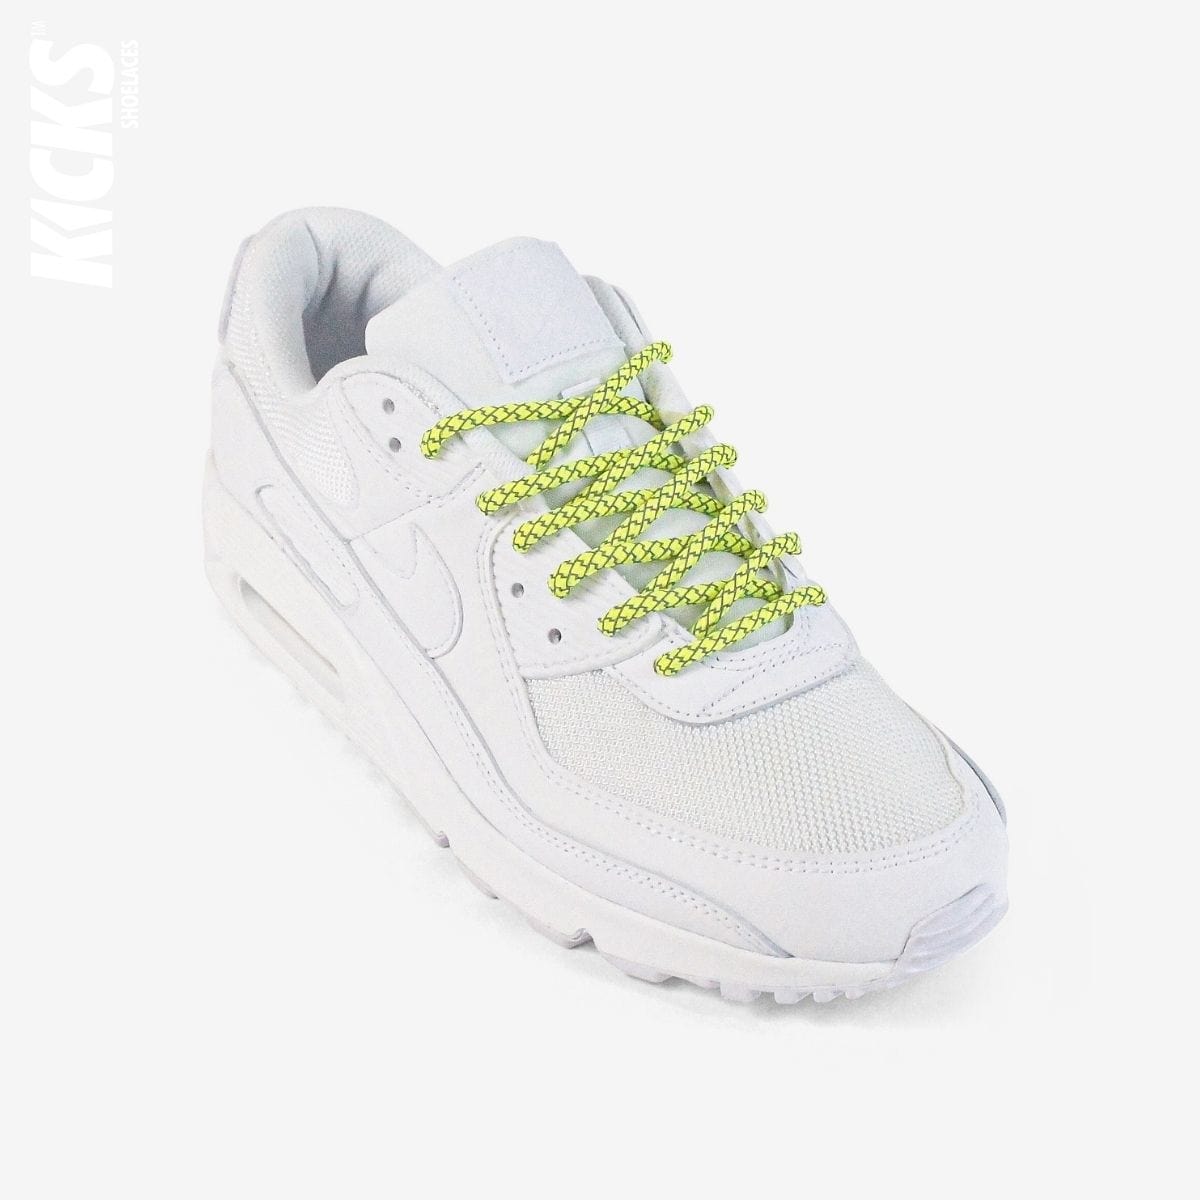 rope-laces-on-white-sneakers-with-kids-fluorescent-yellow-shoelaces